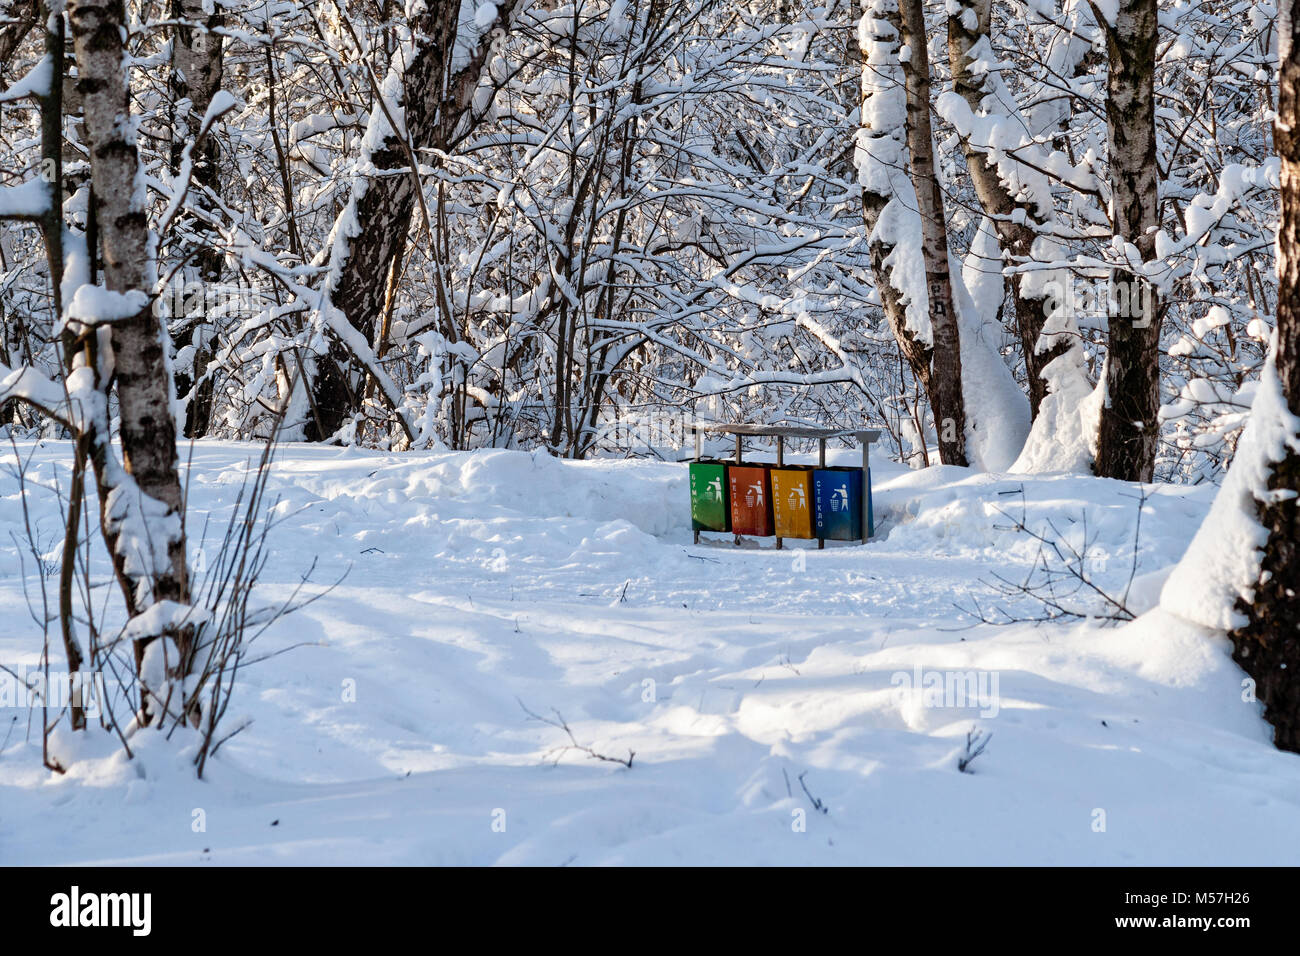 A row of four colorful trash bins in a winter park. Keep the nature clean. Snow covered trees, nobody around Stock Photo